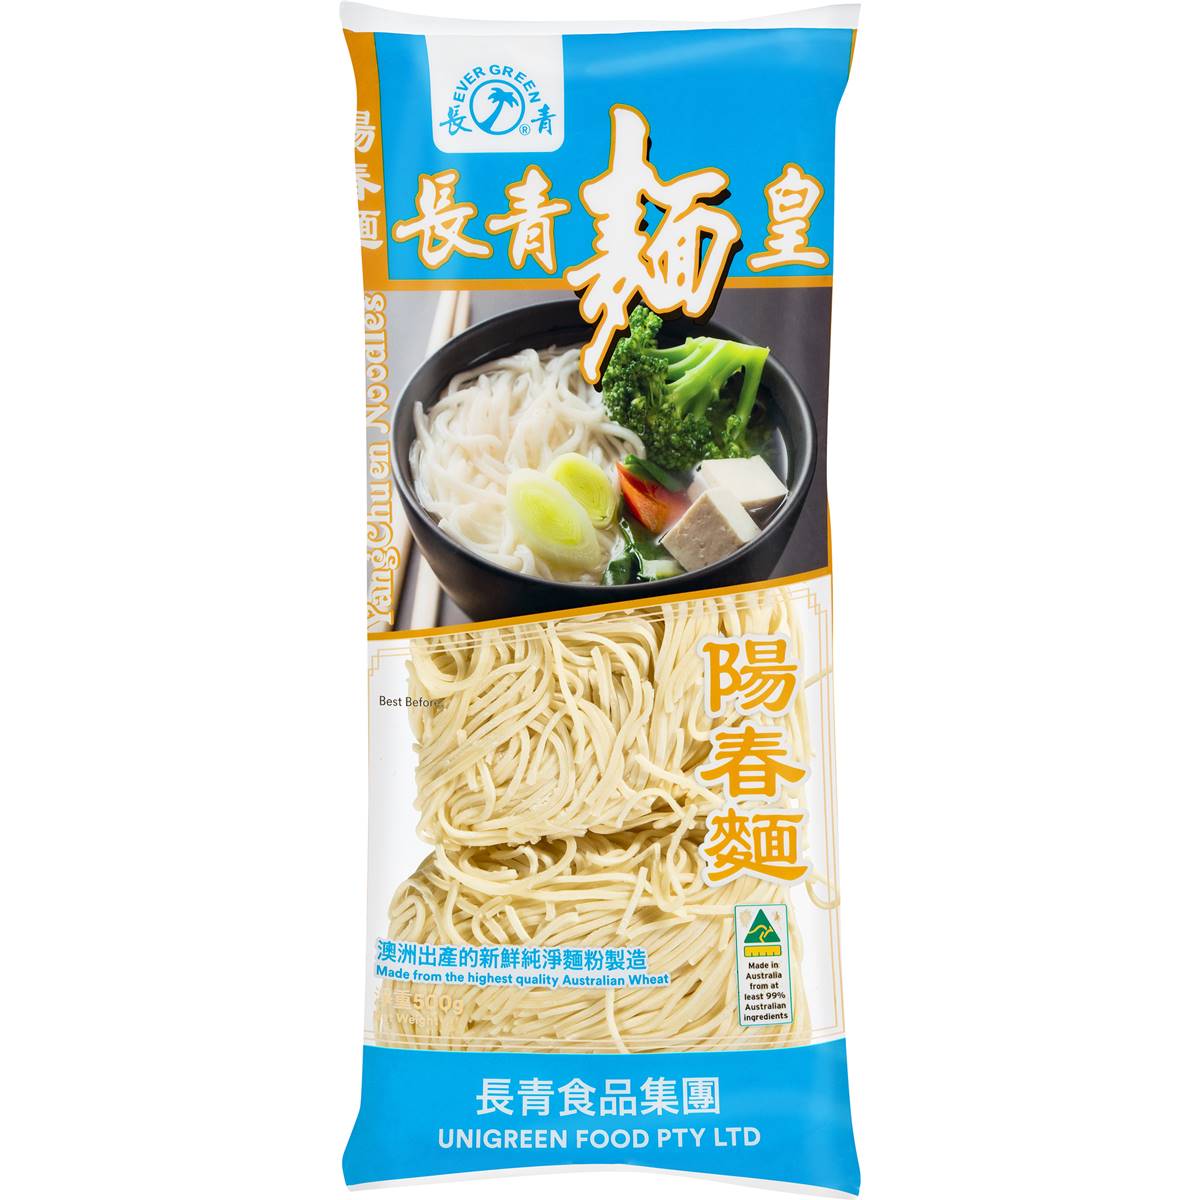 Calories in Evergreen Yang Chun Noodle